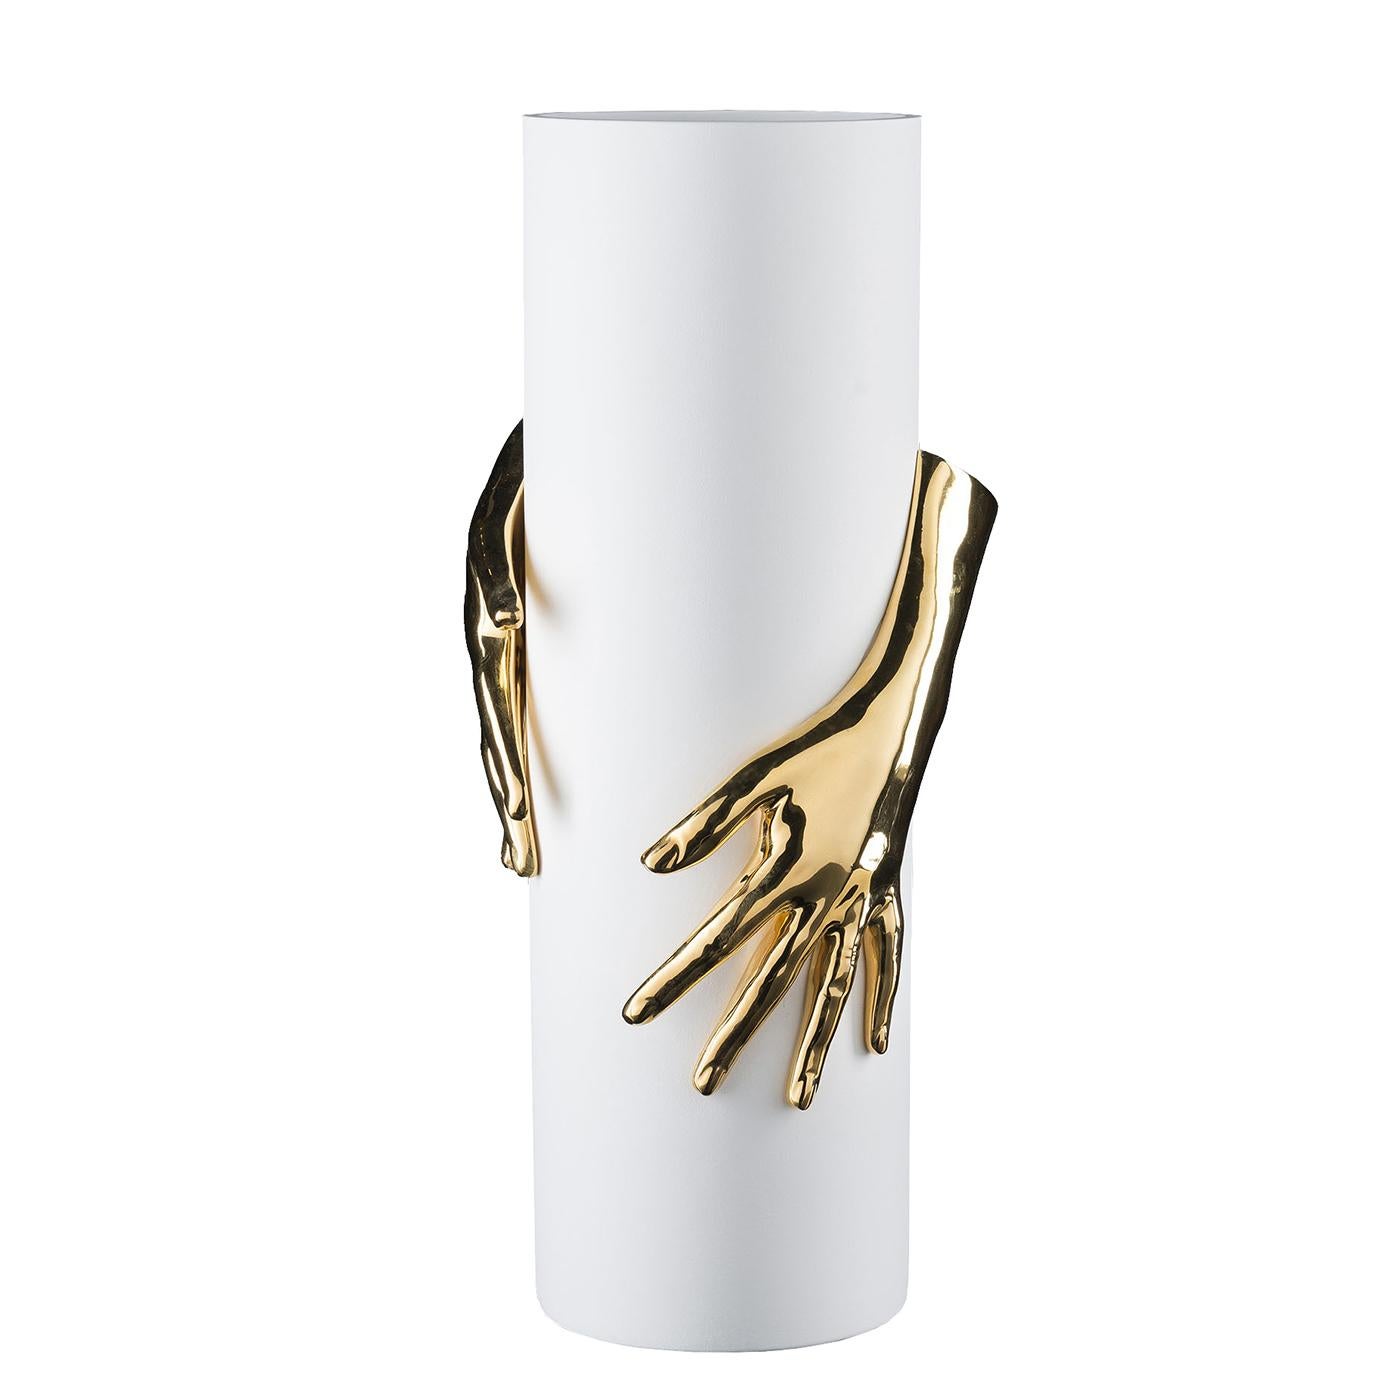 Masterfully handcrafted, this highly decorative vase will make a statement in any decor, infusing it with refined sophistication. A celebration of Italian craftsmanship, it is fashioned of white ceramic and boasts a splendid low relief depicting two